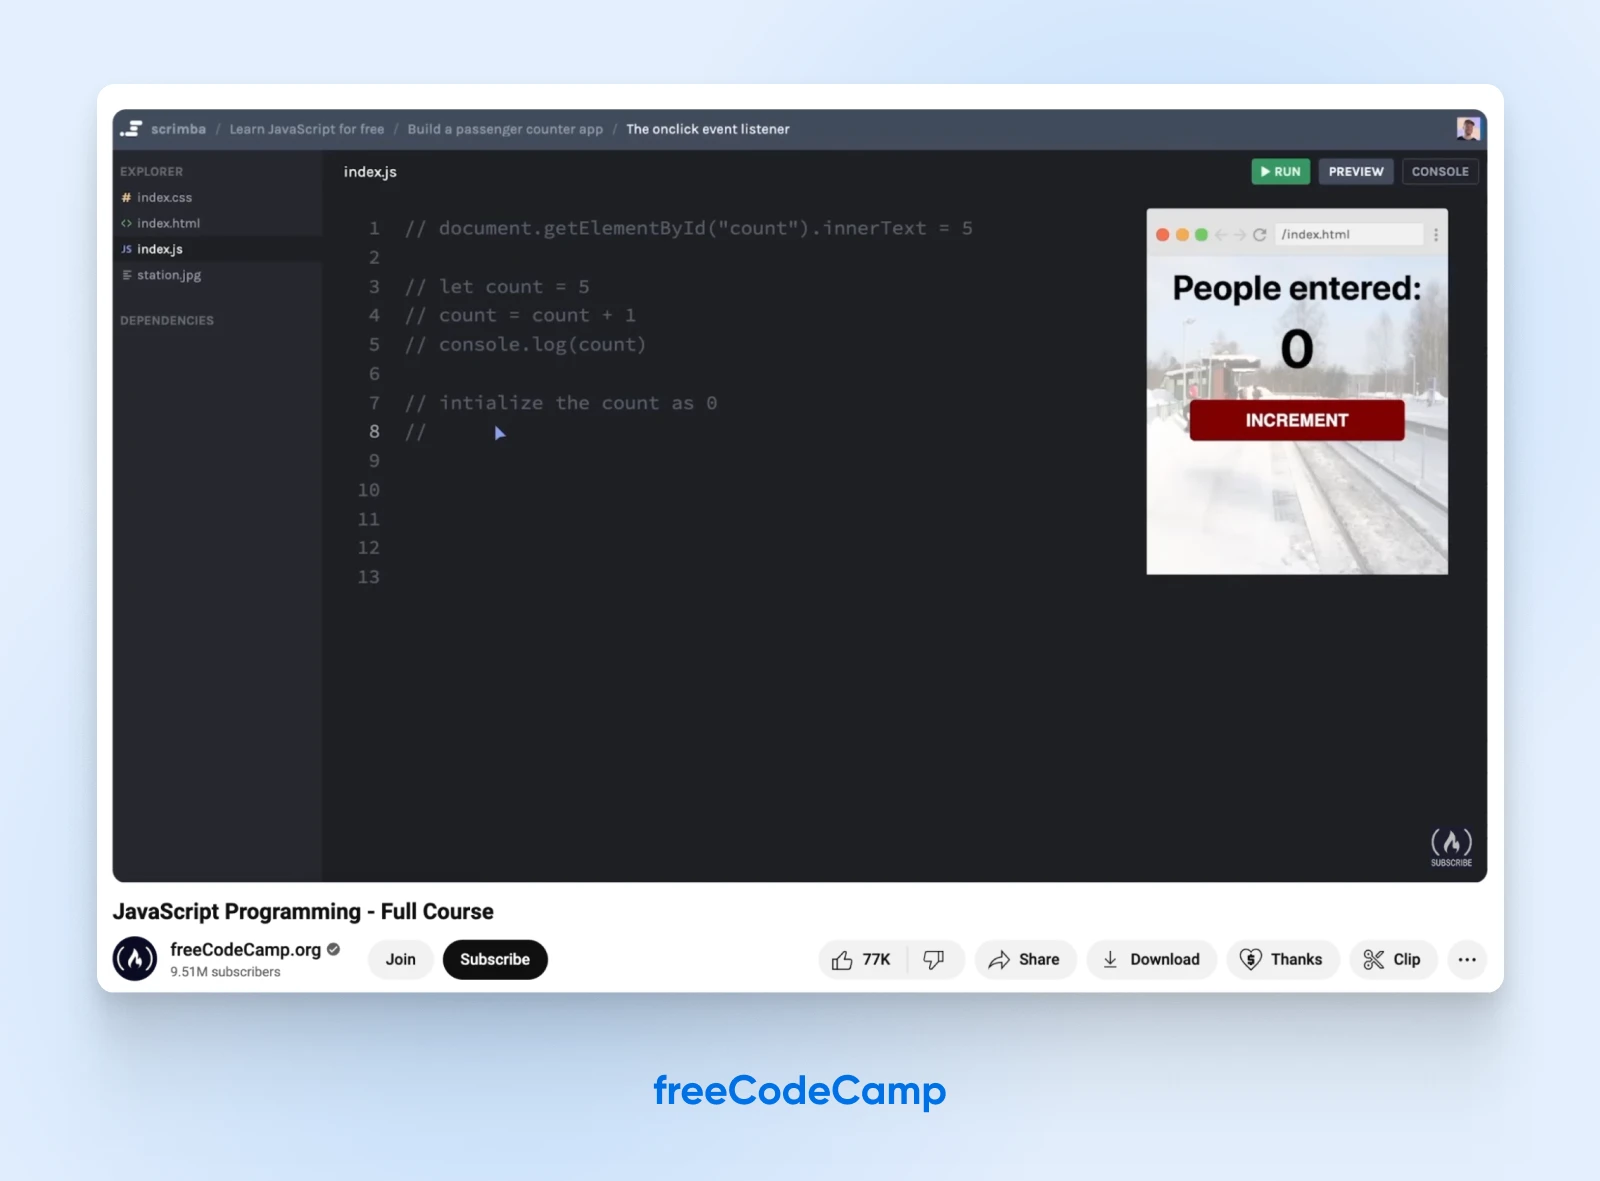 freeCodeCamp's JavaScript Programming - Full Course video on Youtube with over 77K likes.